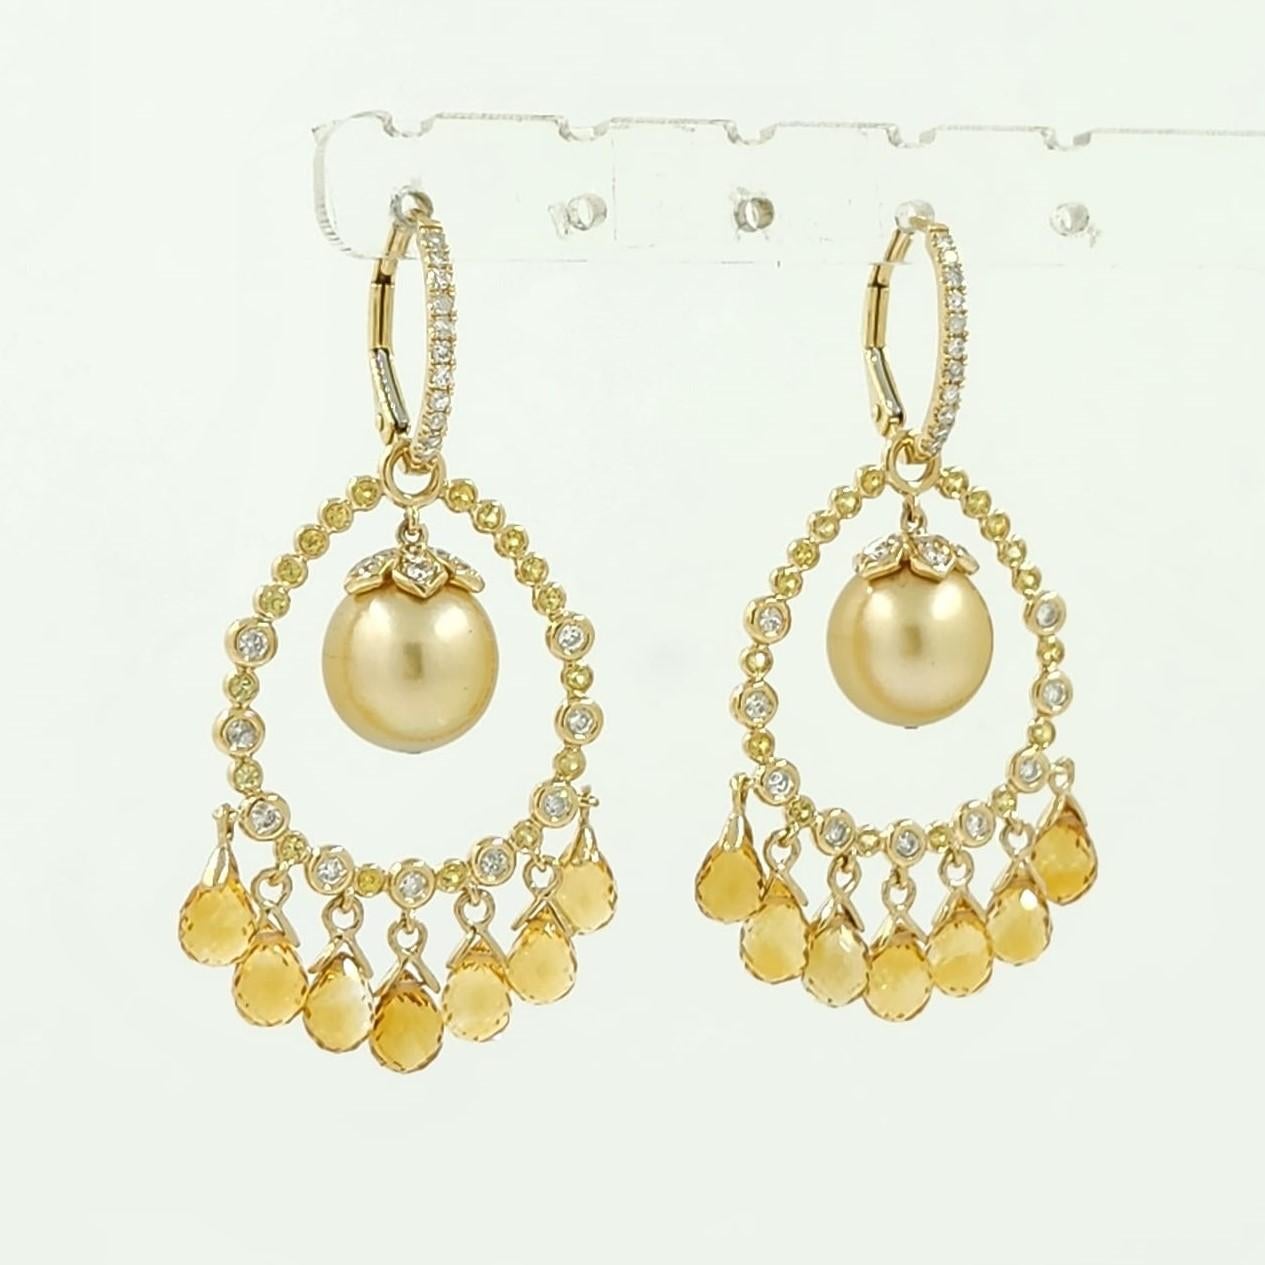 Introducing our Art Deco-inspired 14 karat yellow gold earrings, a luxurious and captivating piece of jewelry that exudes elegance and sophistication. The earrings feature a stunning 10mm goiden color south sea pearl at the center, surrounded by a